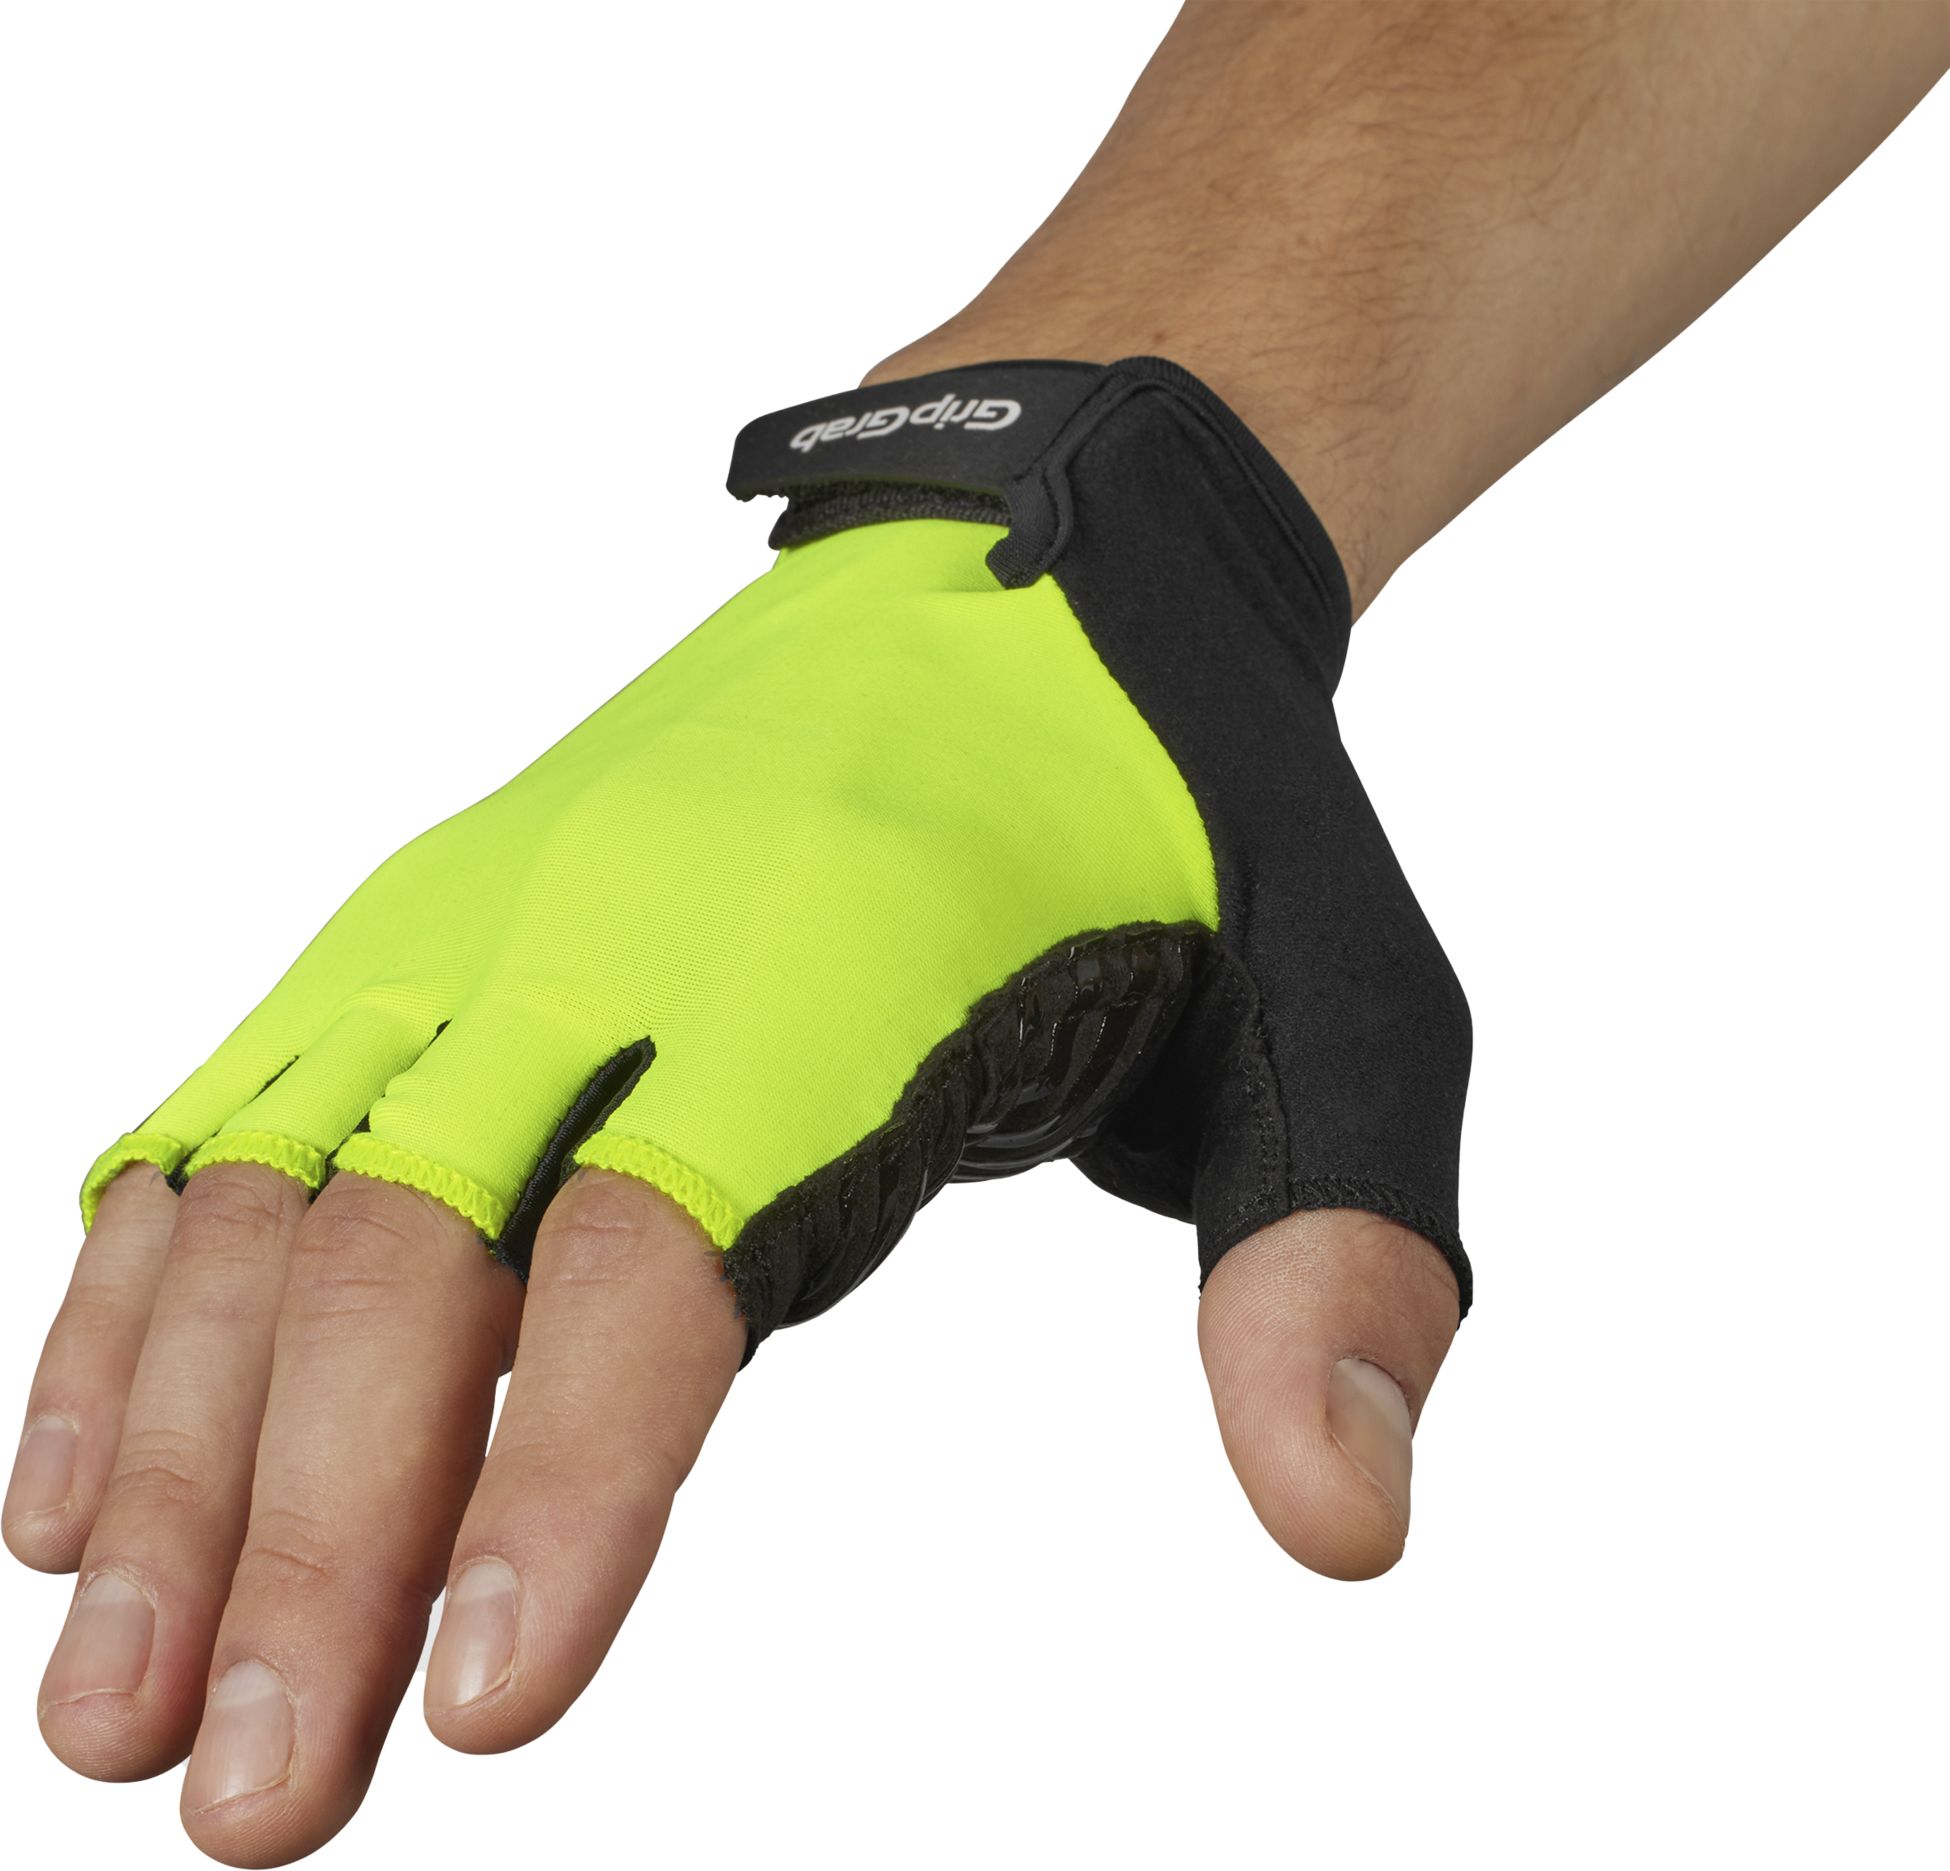 GRIPGRAB, ProRide RC Max Padded Short Finger Gloves